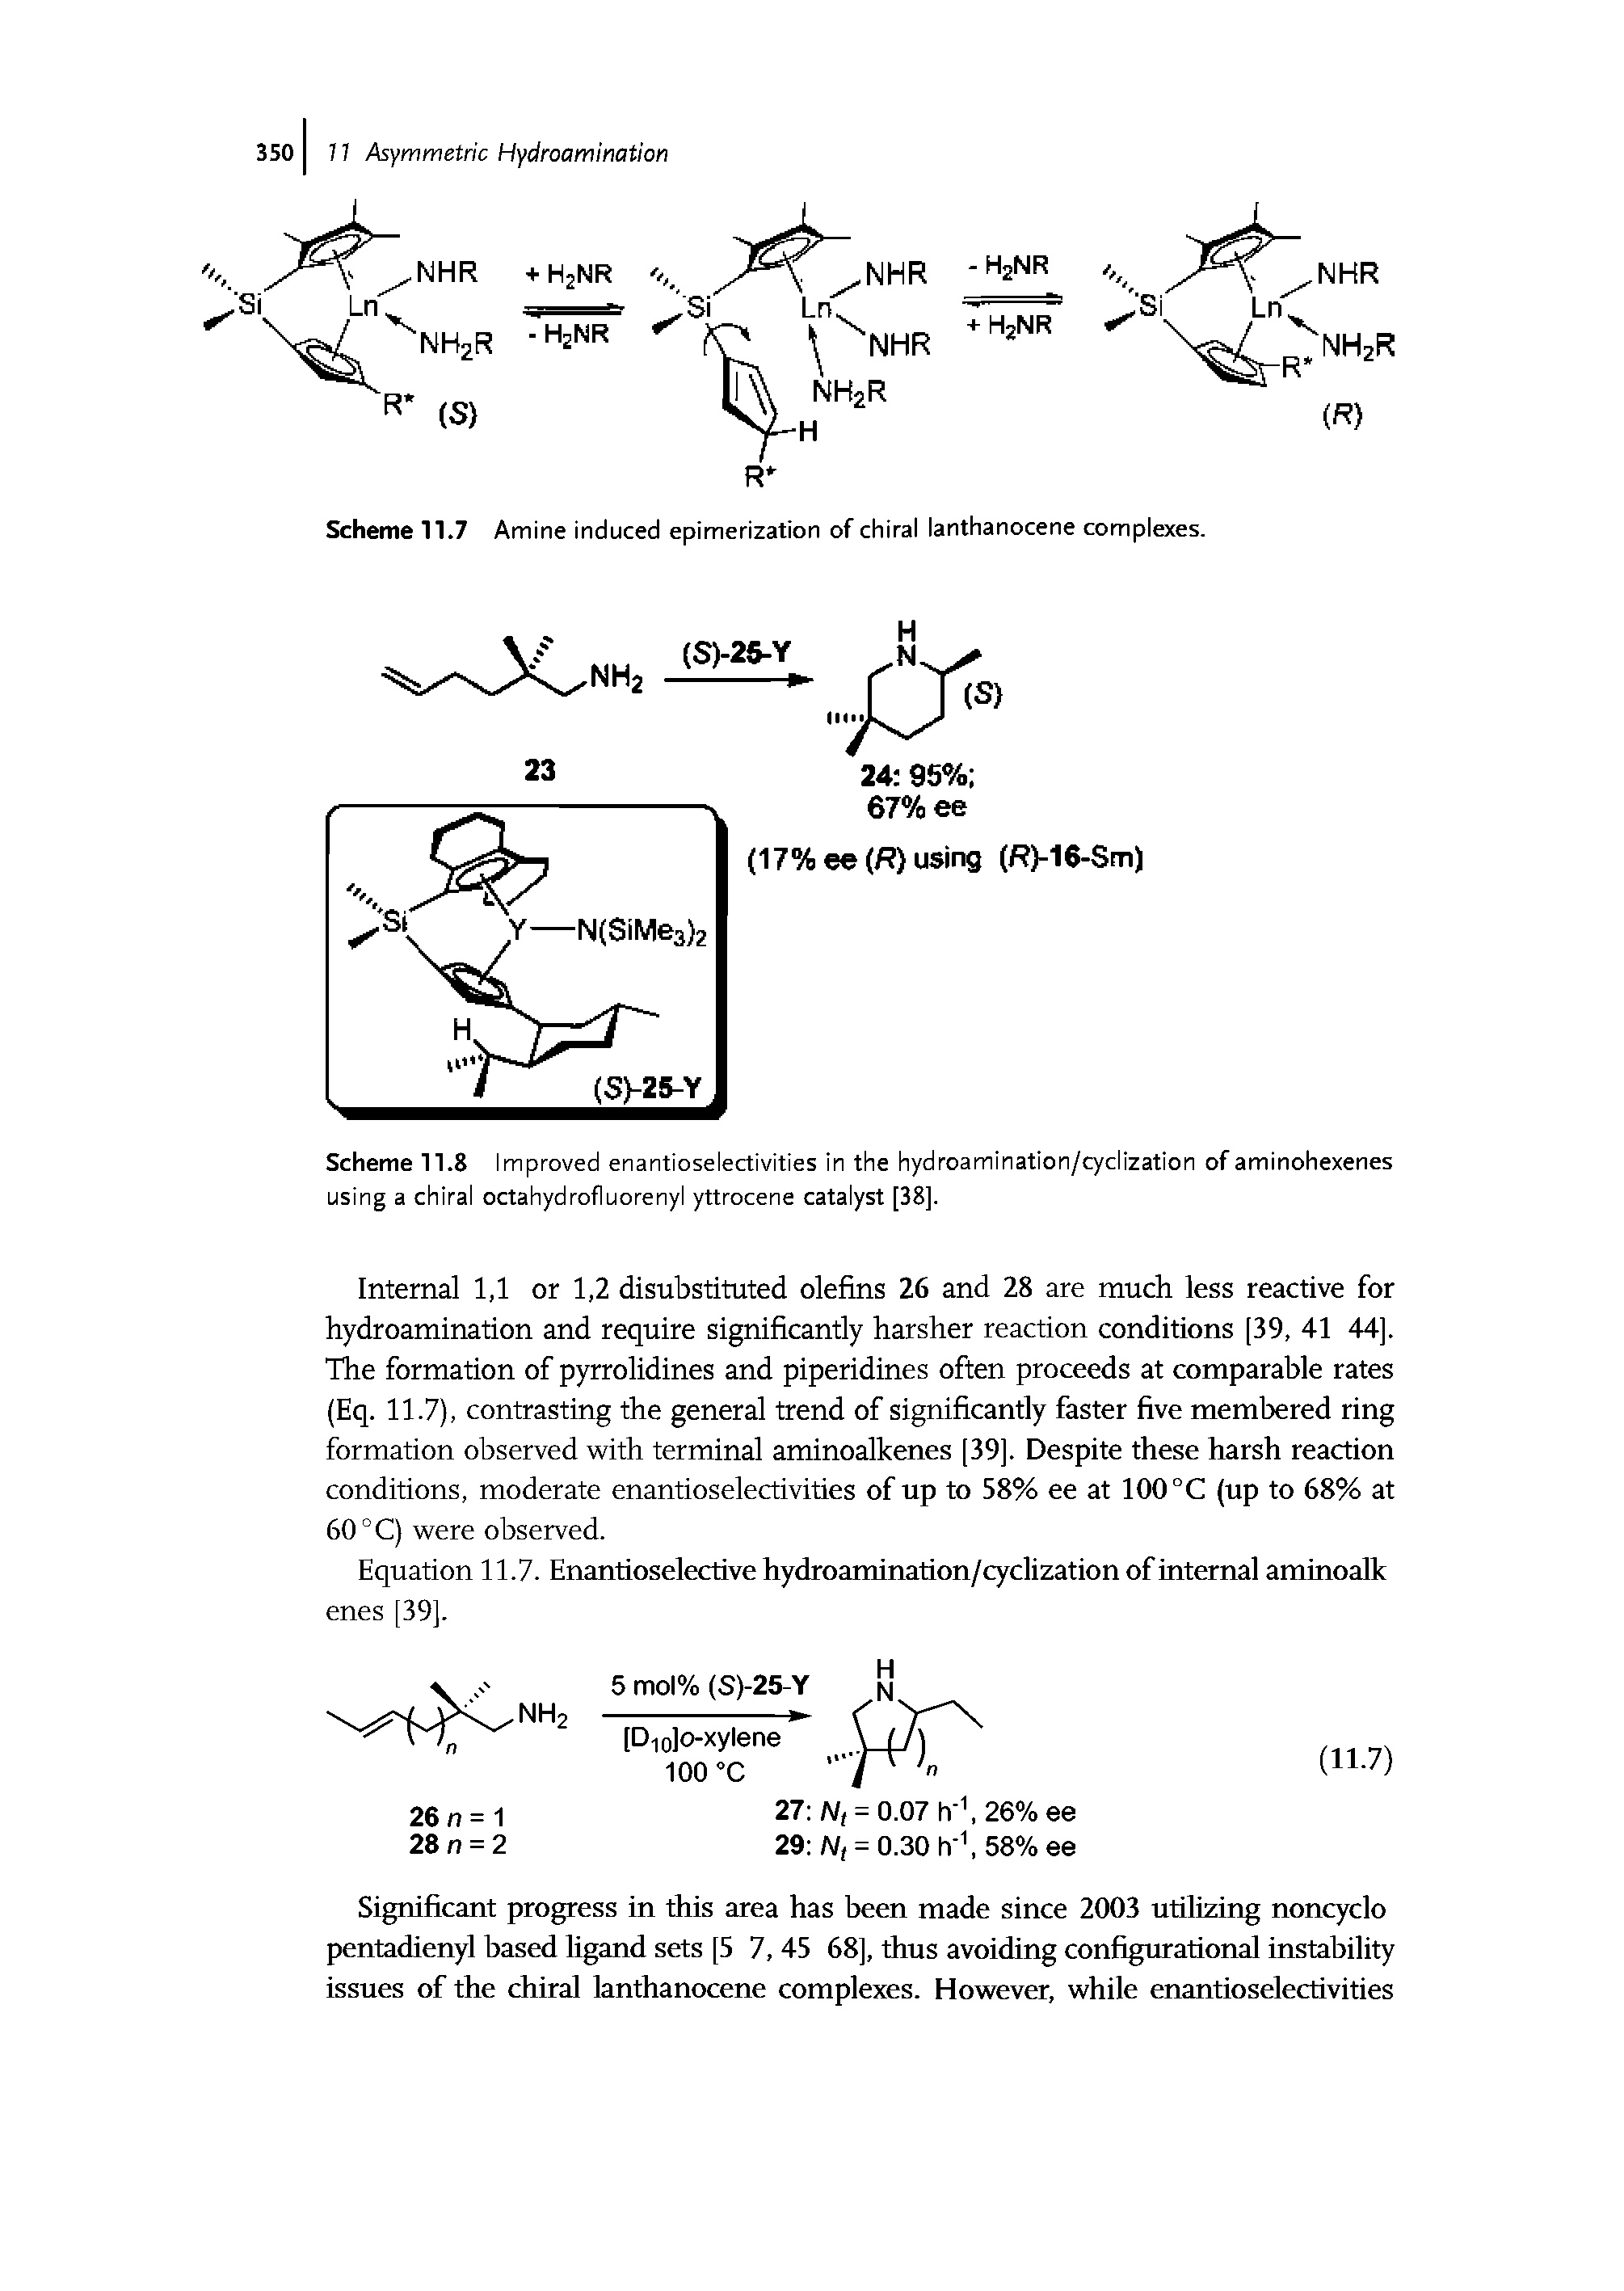 Scheme 11.8 Improved enantioselectivities in the hydroamination/cyclization of aminohexenes using a chiral octahydrofluorenyl yttrocene catalyst [38].